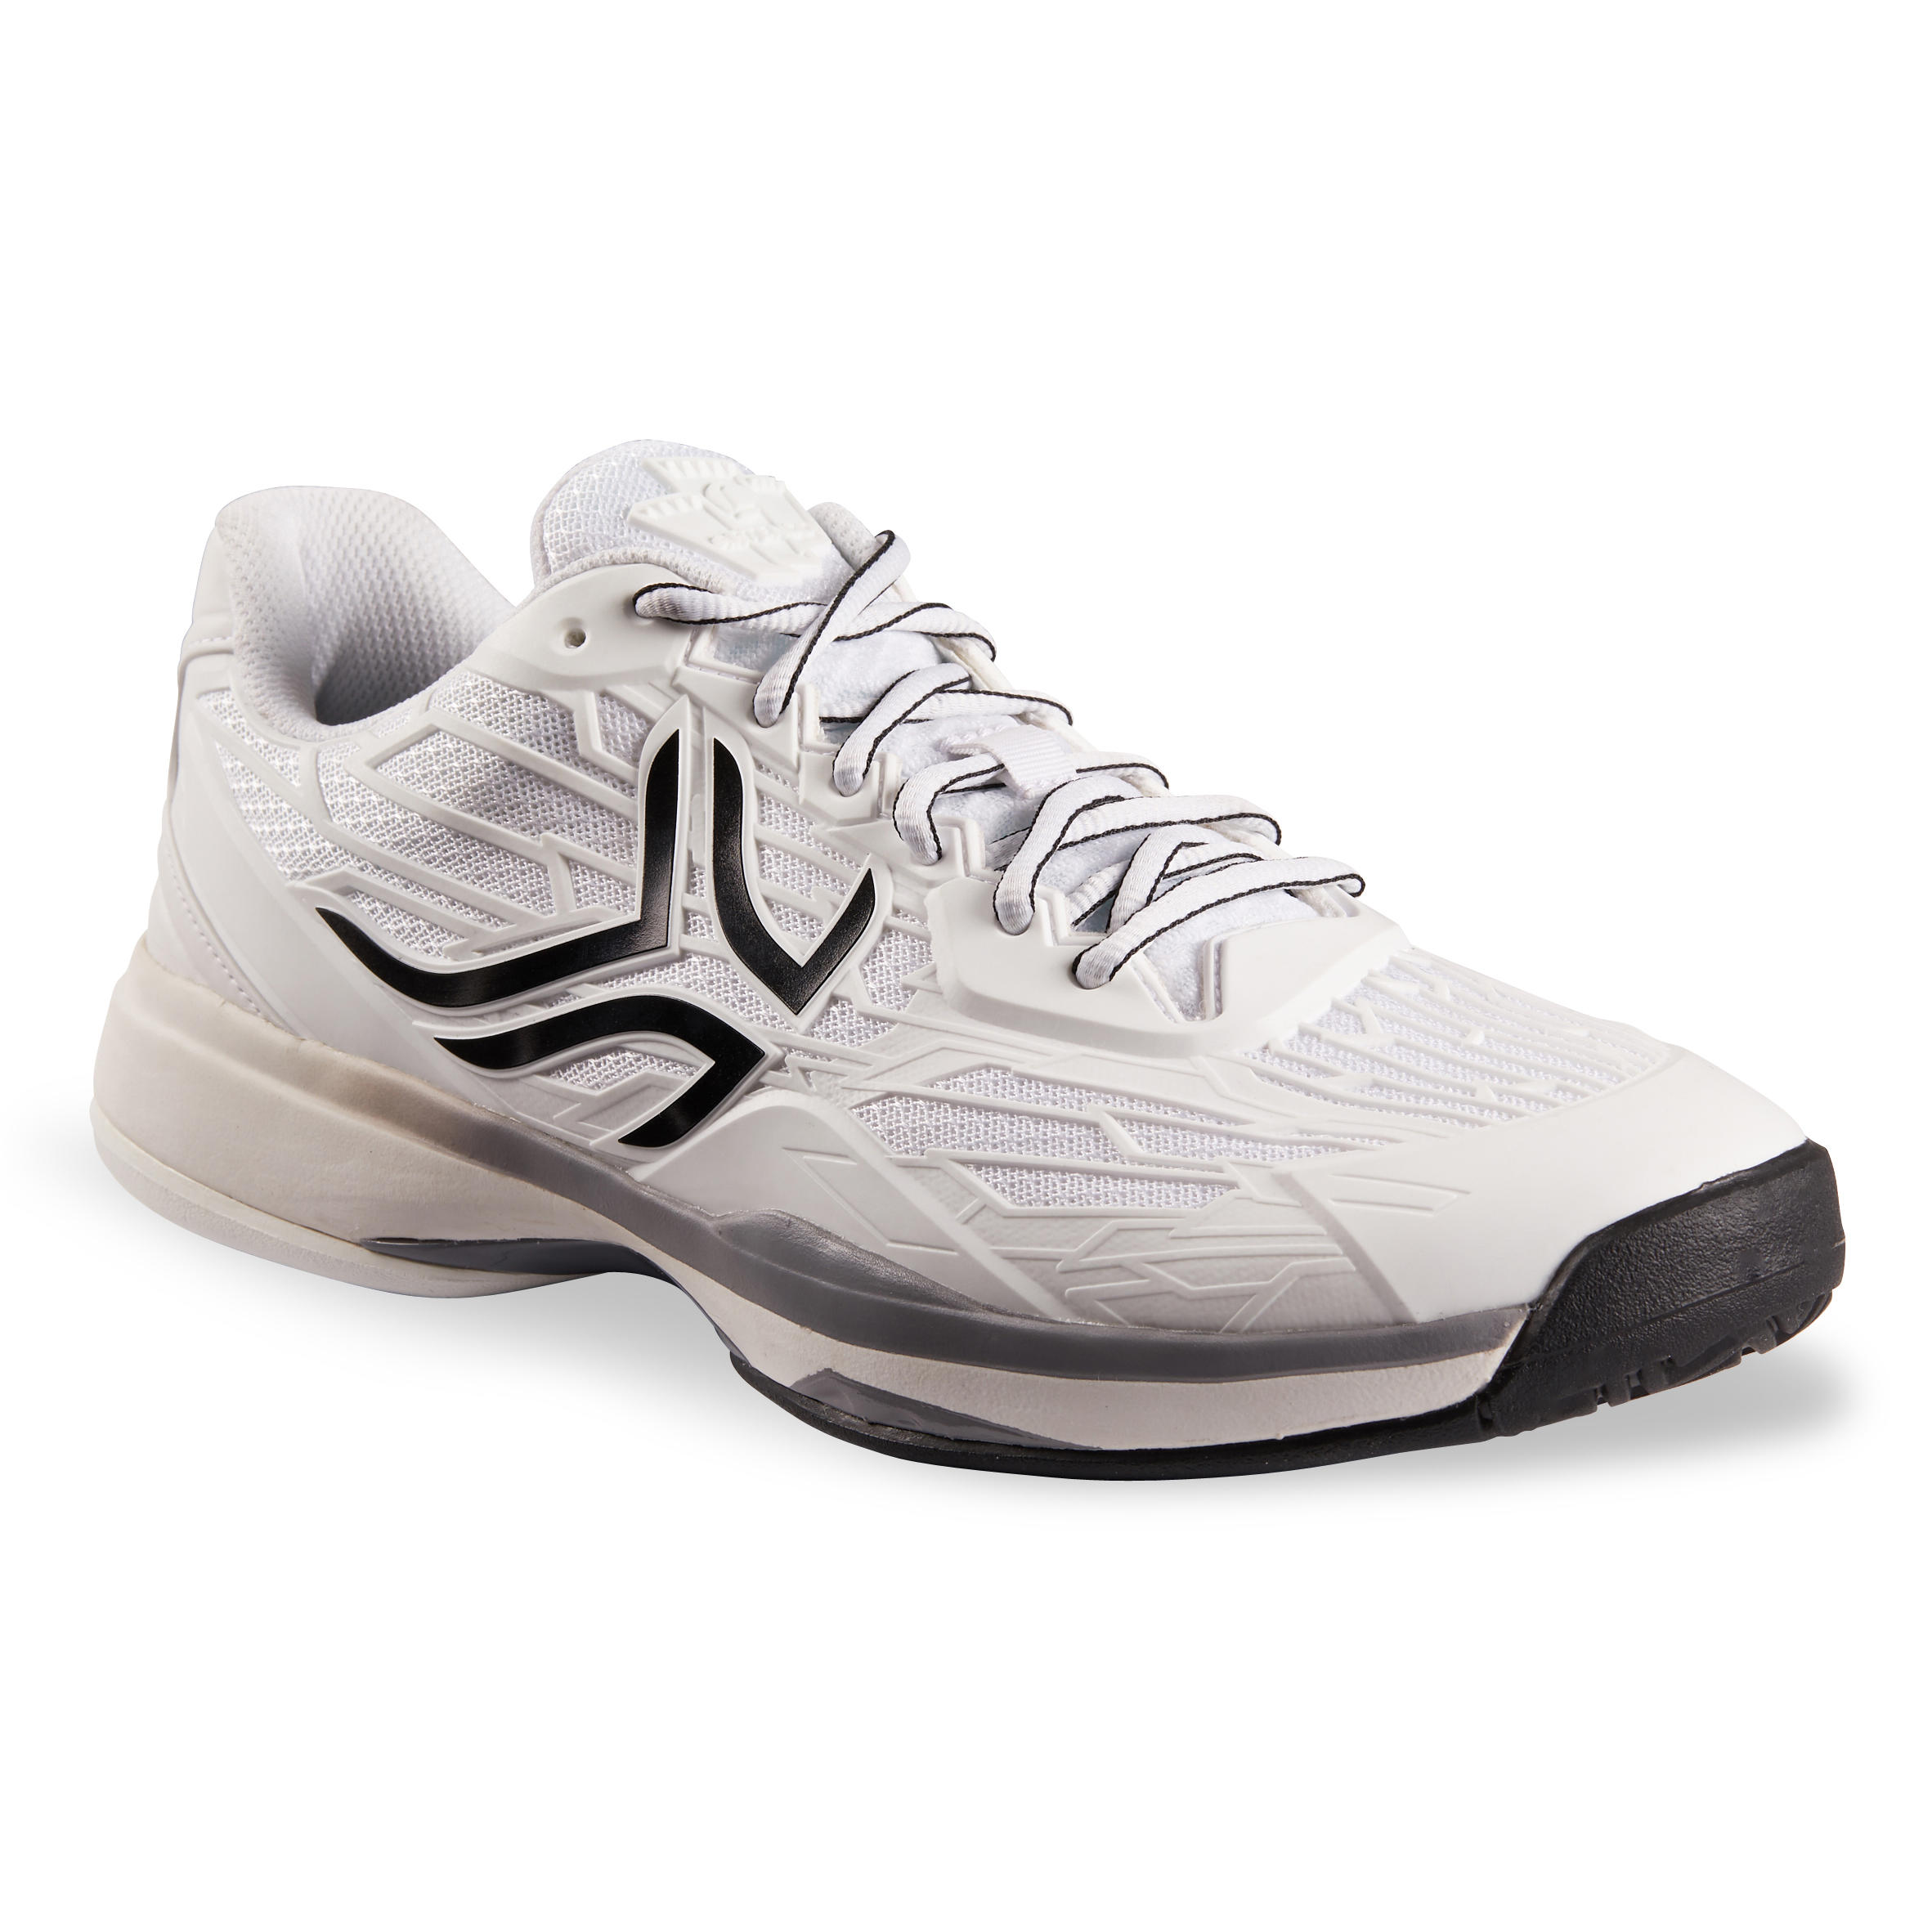 grey and white tennis shoes